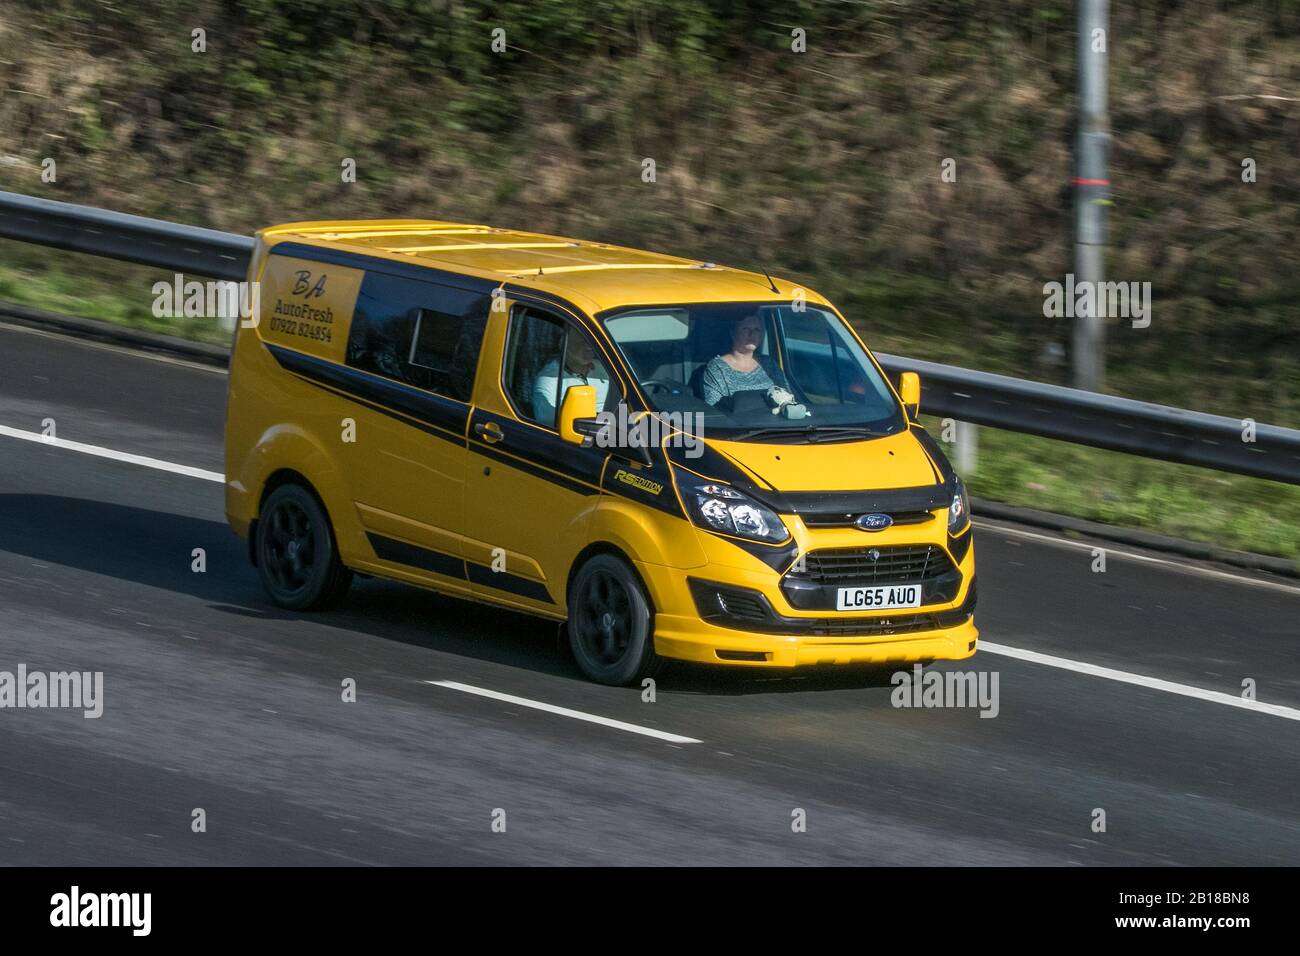 Transit Custom High Resolution Stock Photography and Images - Alamy